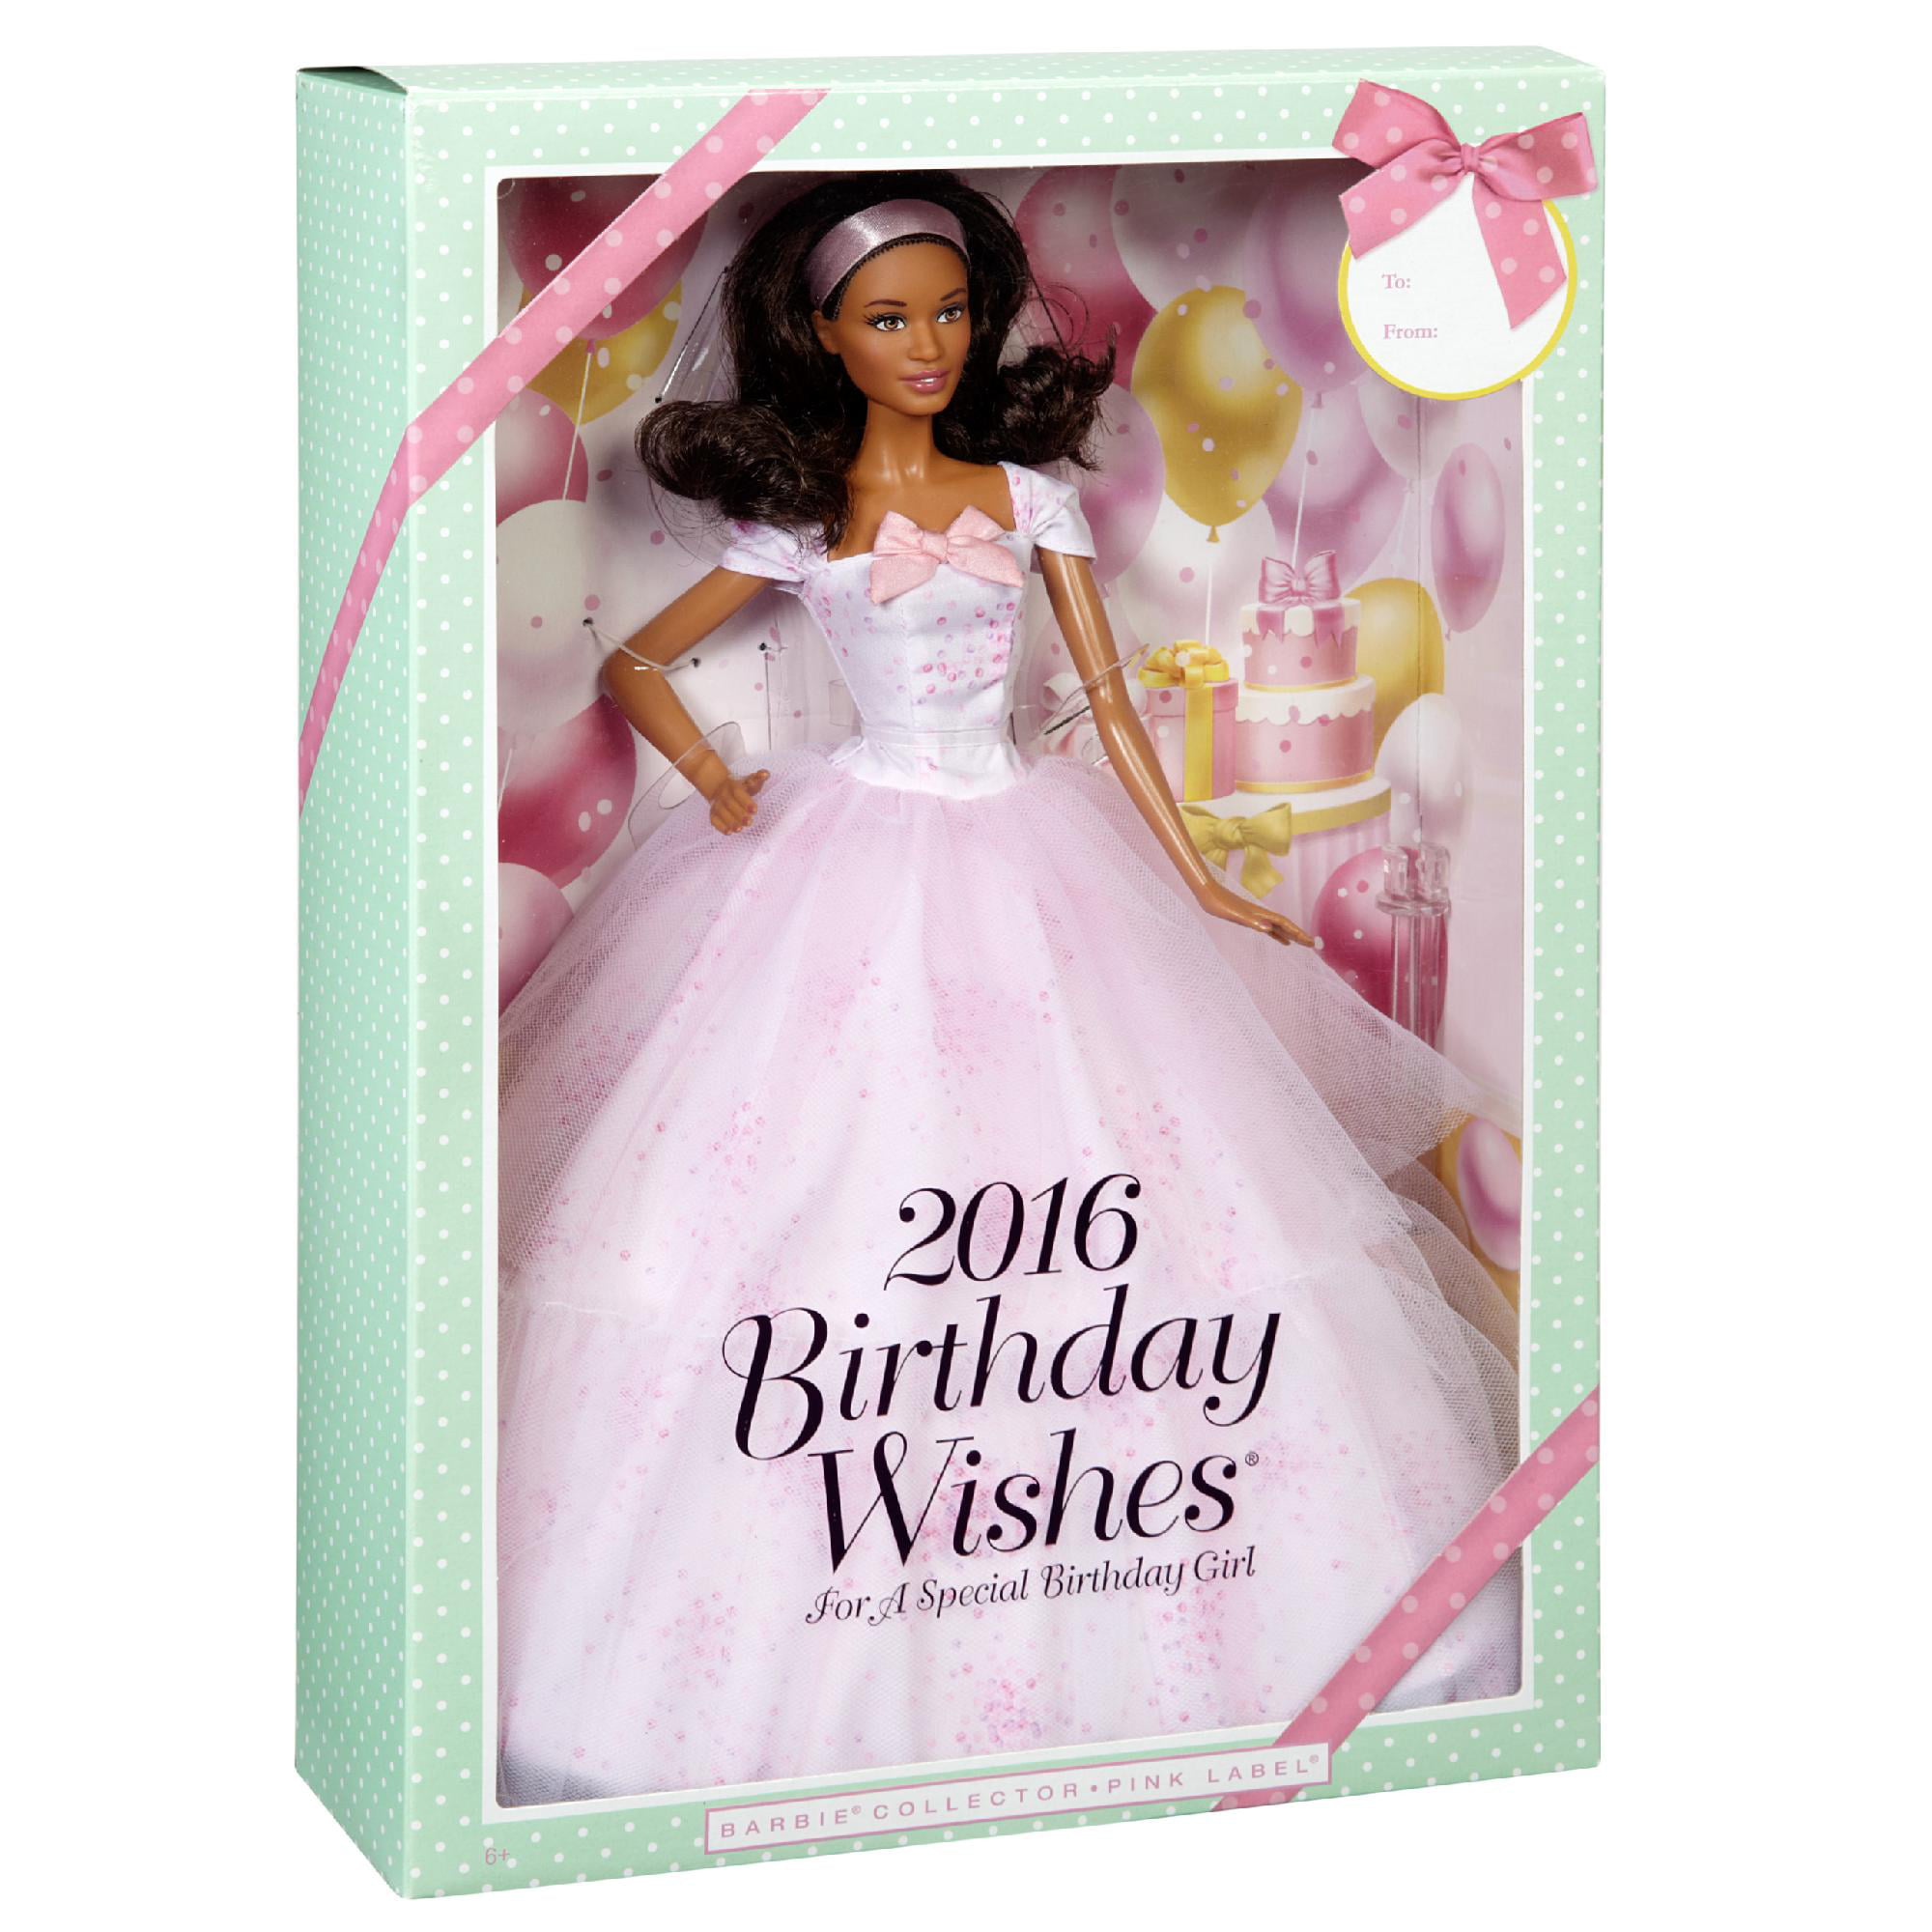  Barbie Girls Collector Birthday Wishes Doll : Barbie